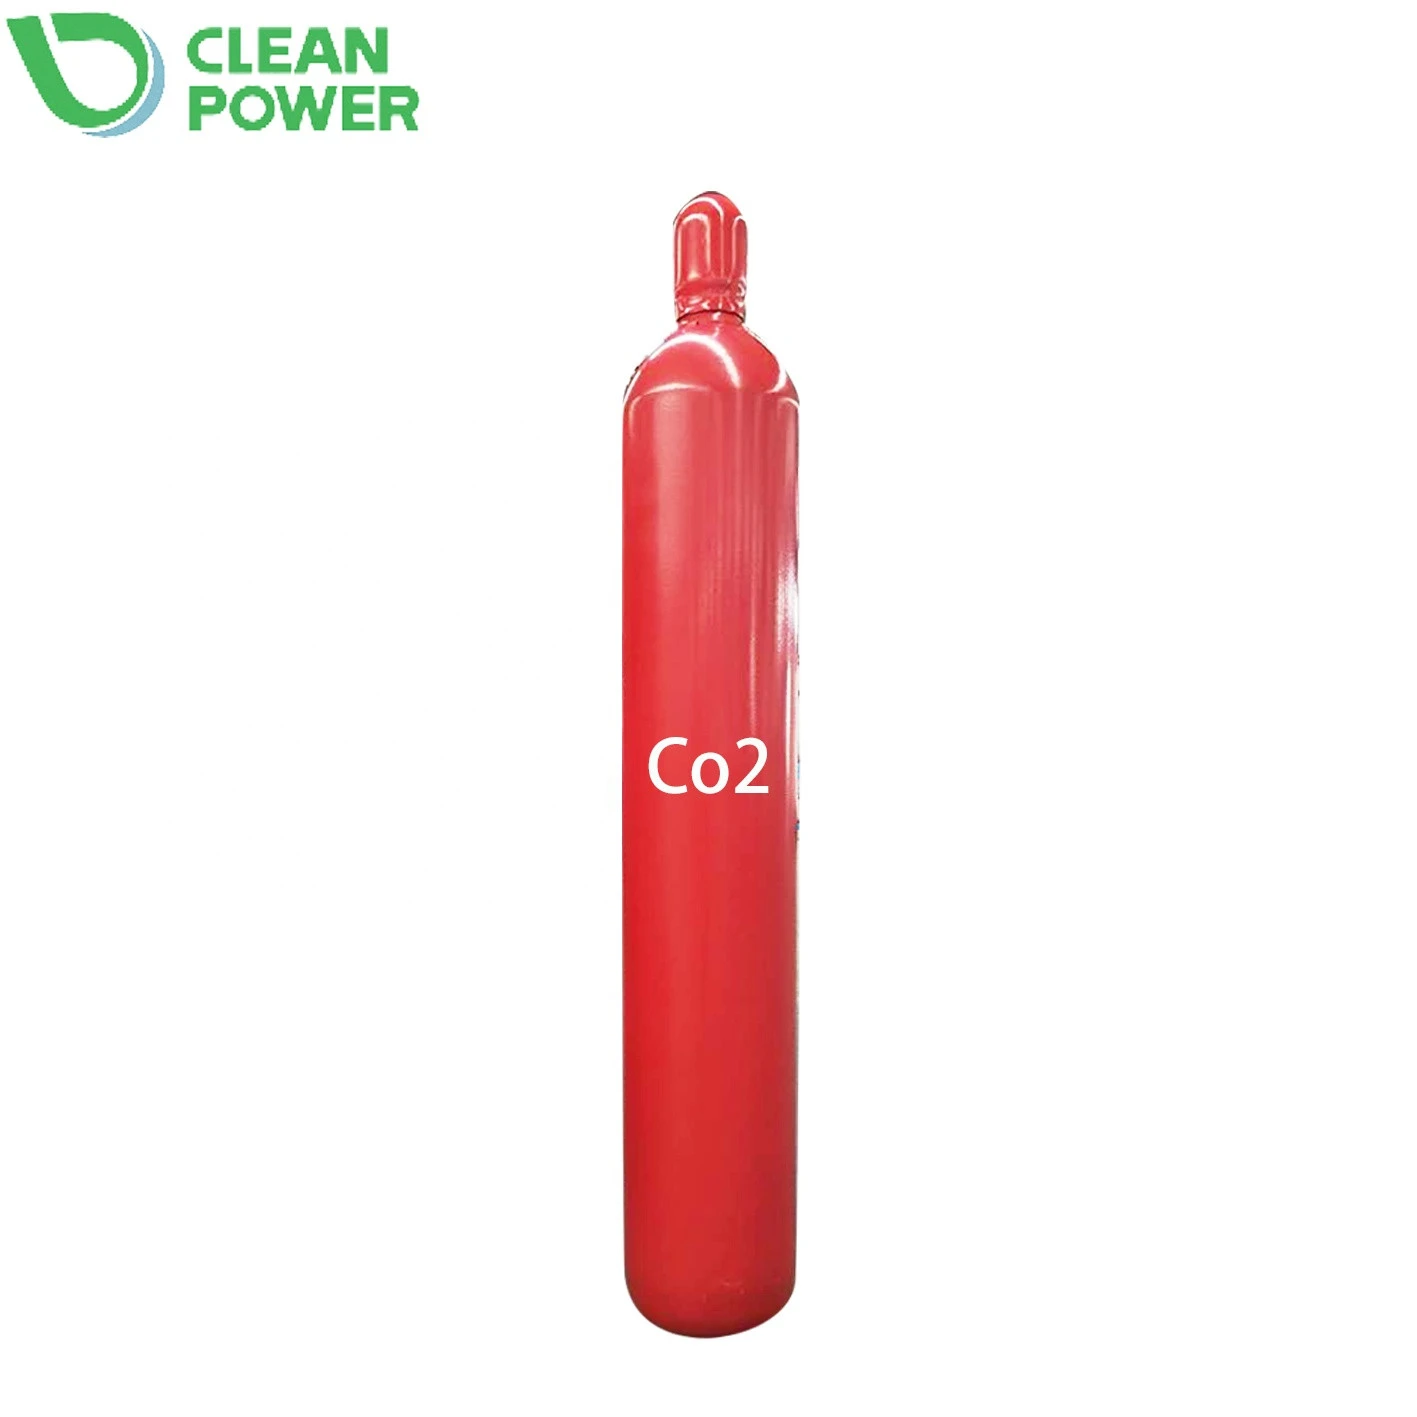 Firefighting gas cylinder filling CO2 267-68L ISO9809-1 firefighting safety system use seamless steel cylinder